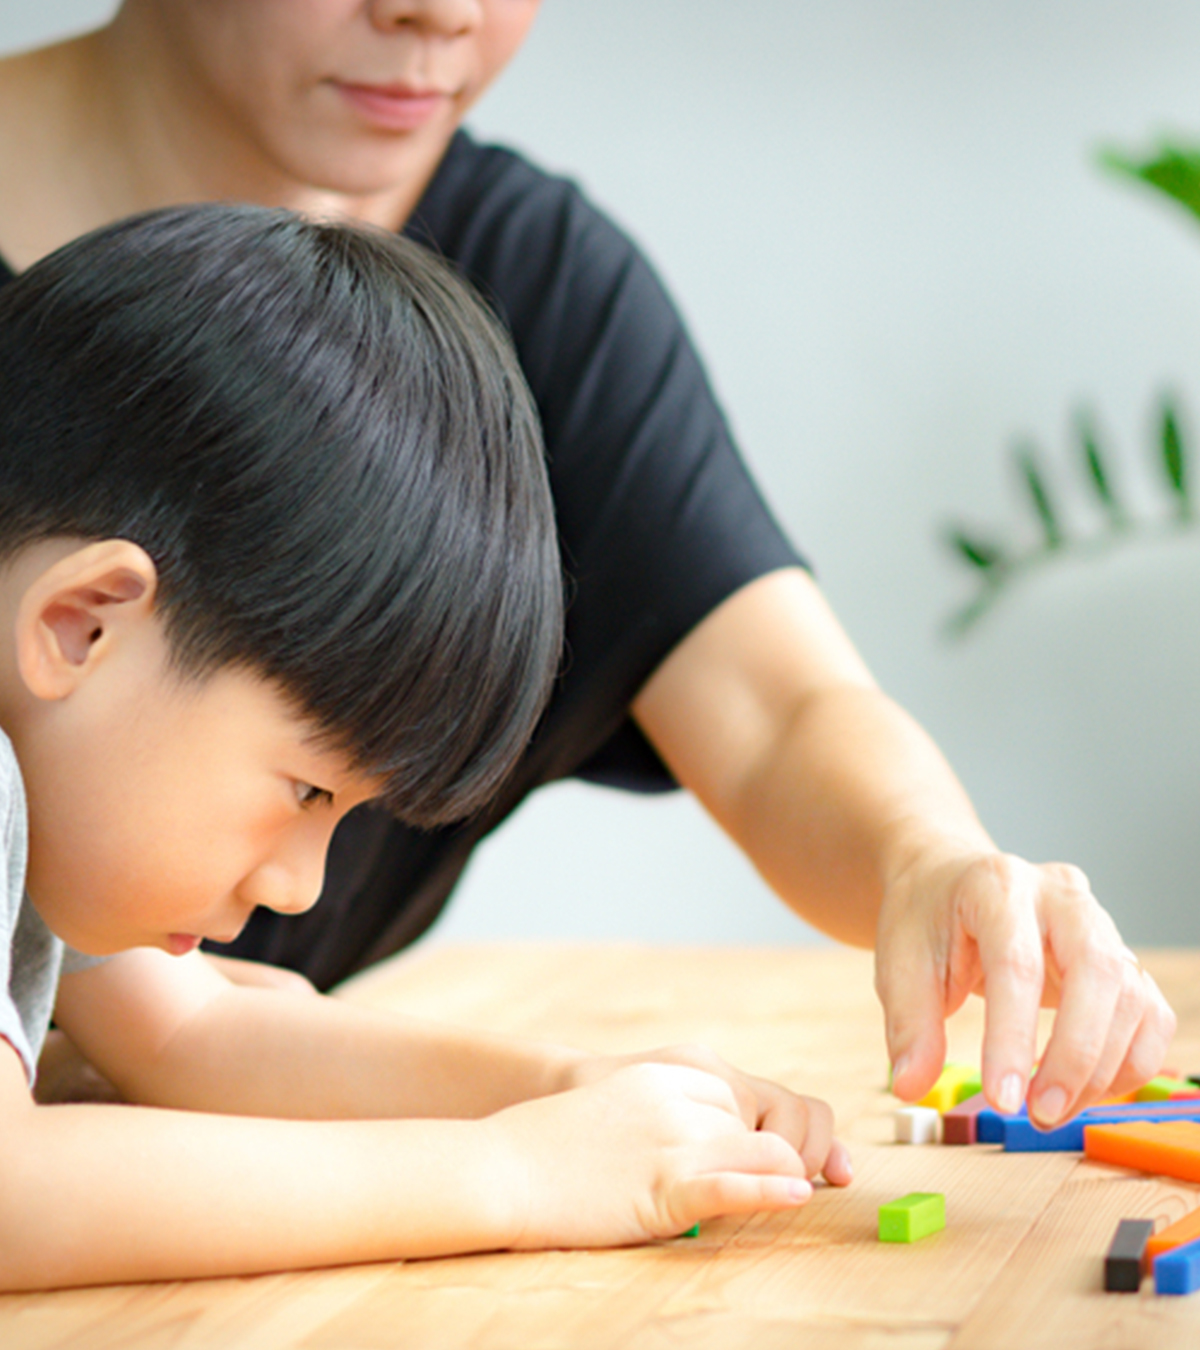 15 Fun Activities To Teach Problem Solving To Kids